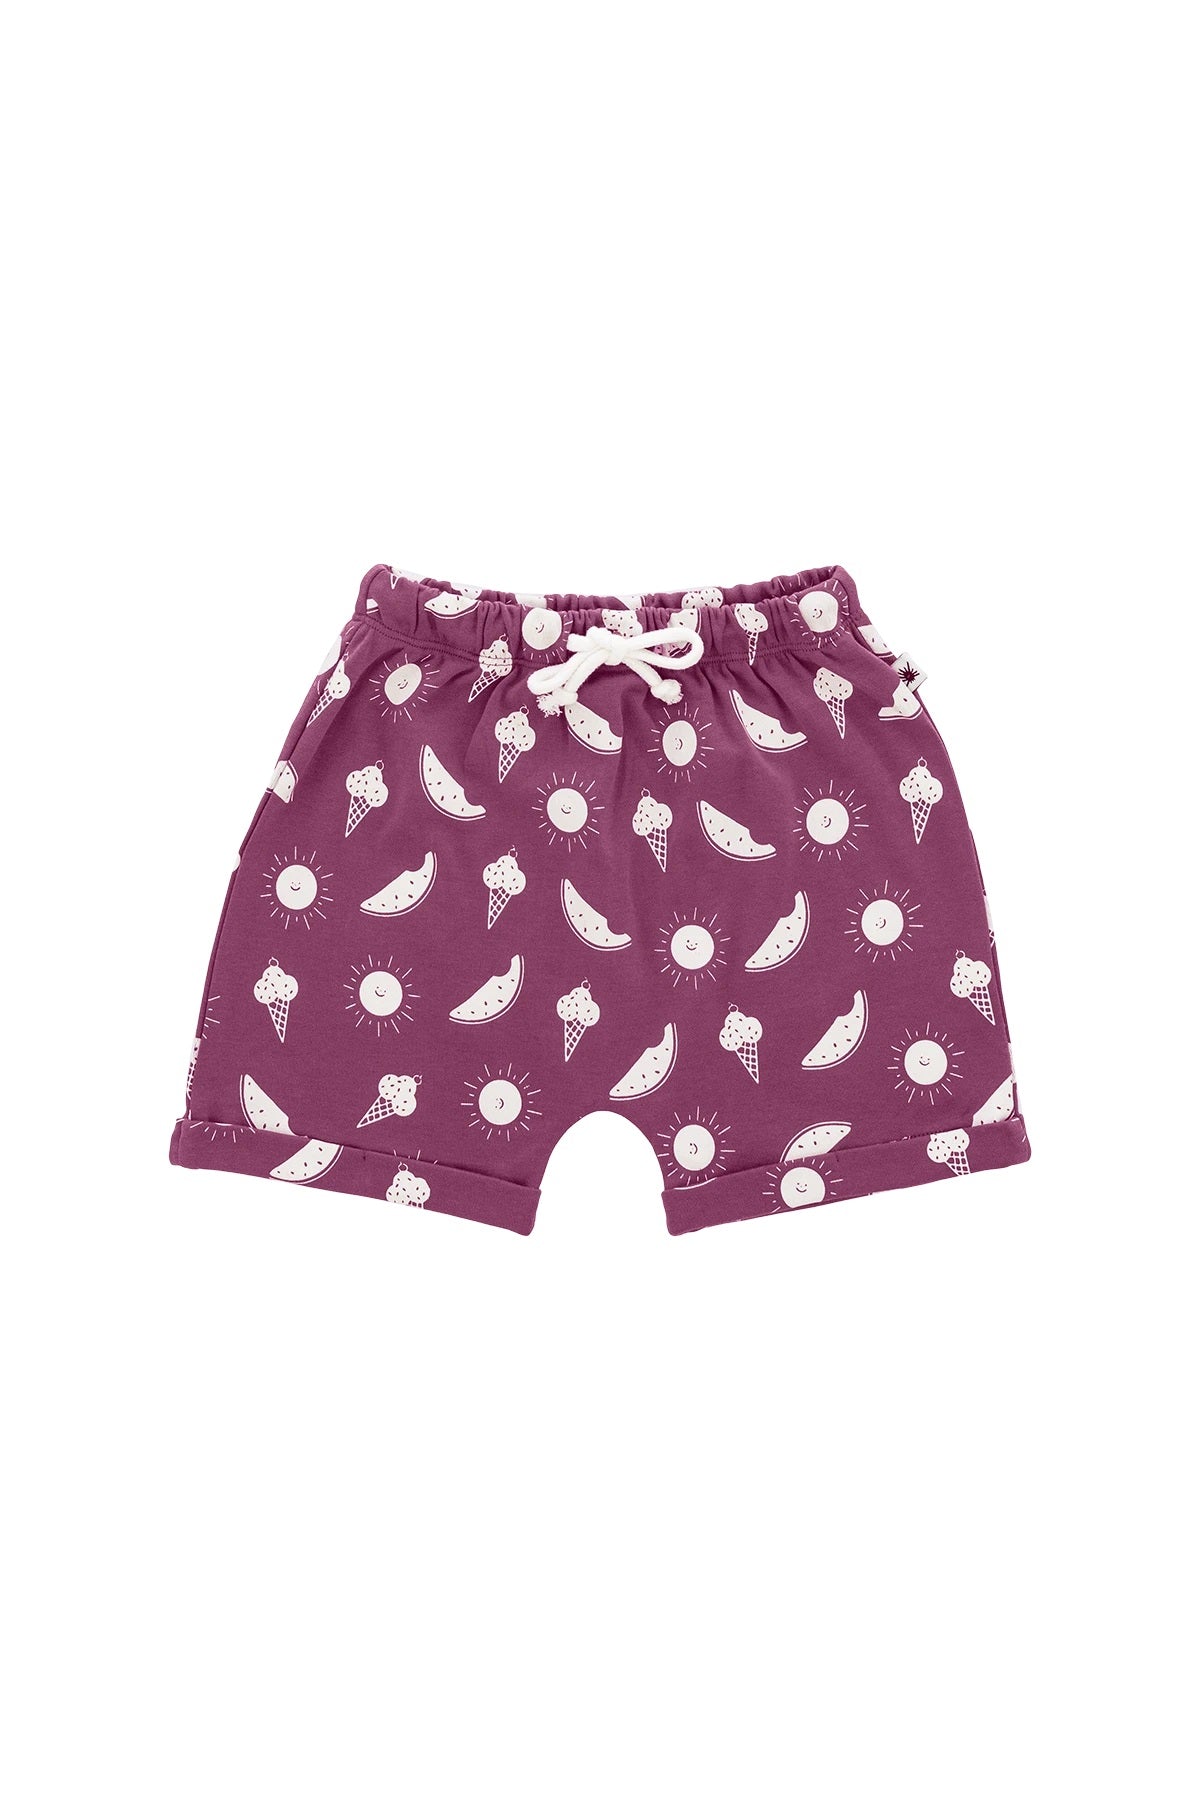 organic cotton Purple Shot for Boys and girls. soft and breathable cotton short